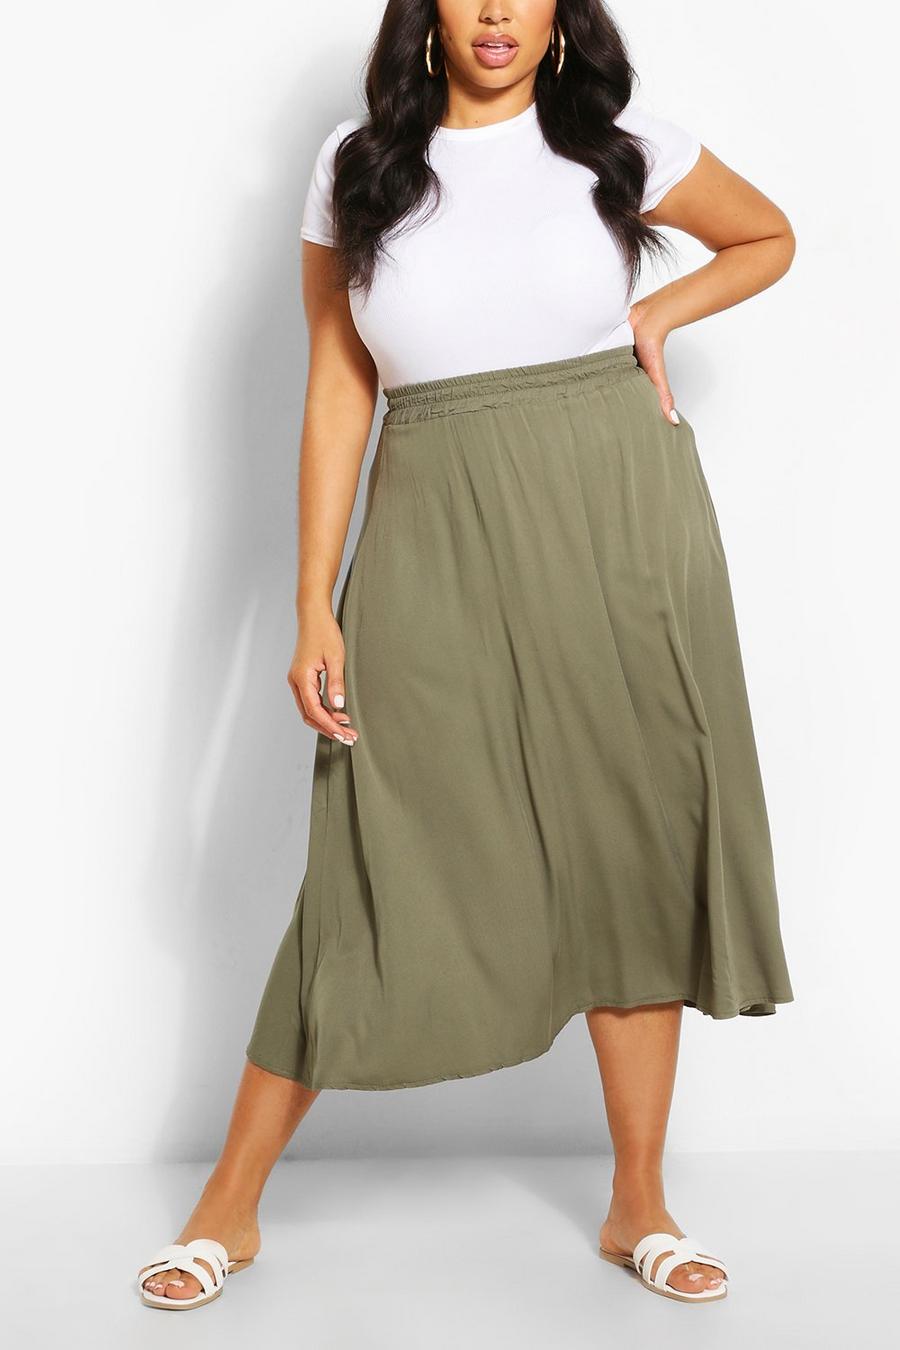 Green Skirts | Bright, Lime & Forest Green Skirts | boohoo UK